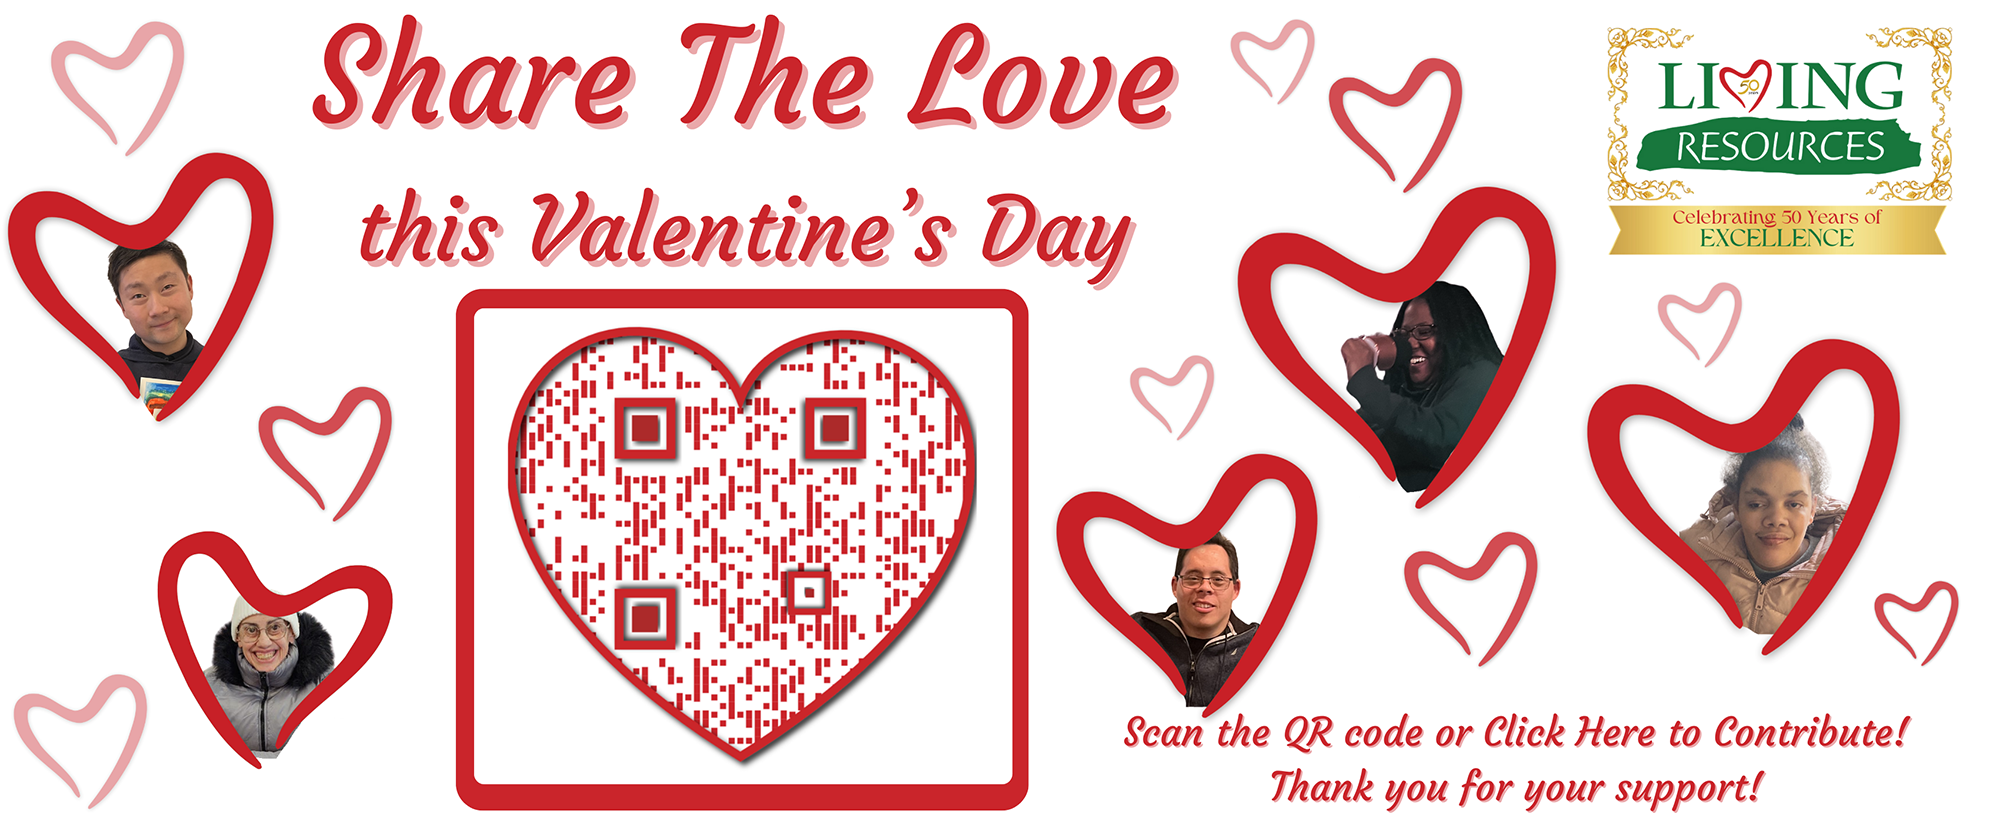 The photos of five individuals are seen in the Living Resources branded heart. Text reads: Share the Love this Valentine's Day. Scan the QR code or Click here to contribute. Thank you for your support!